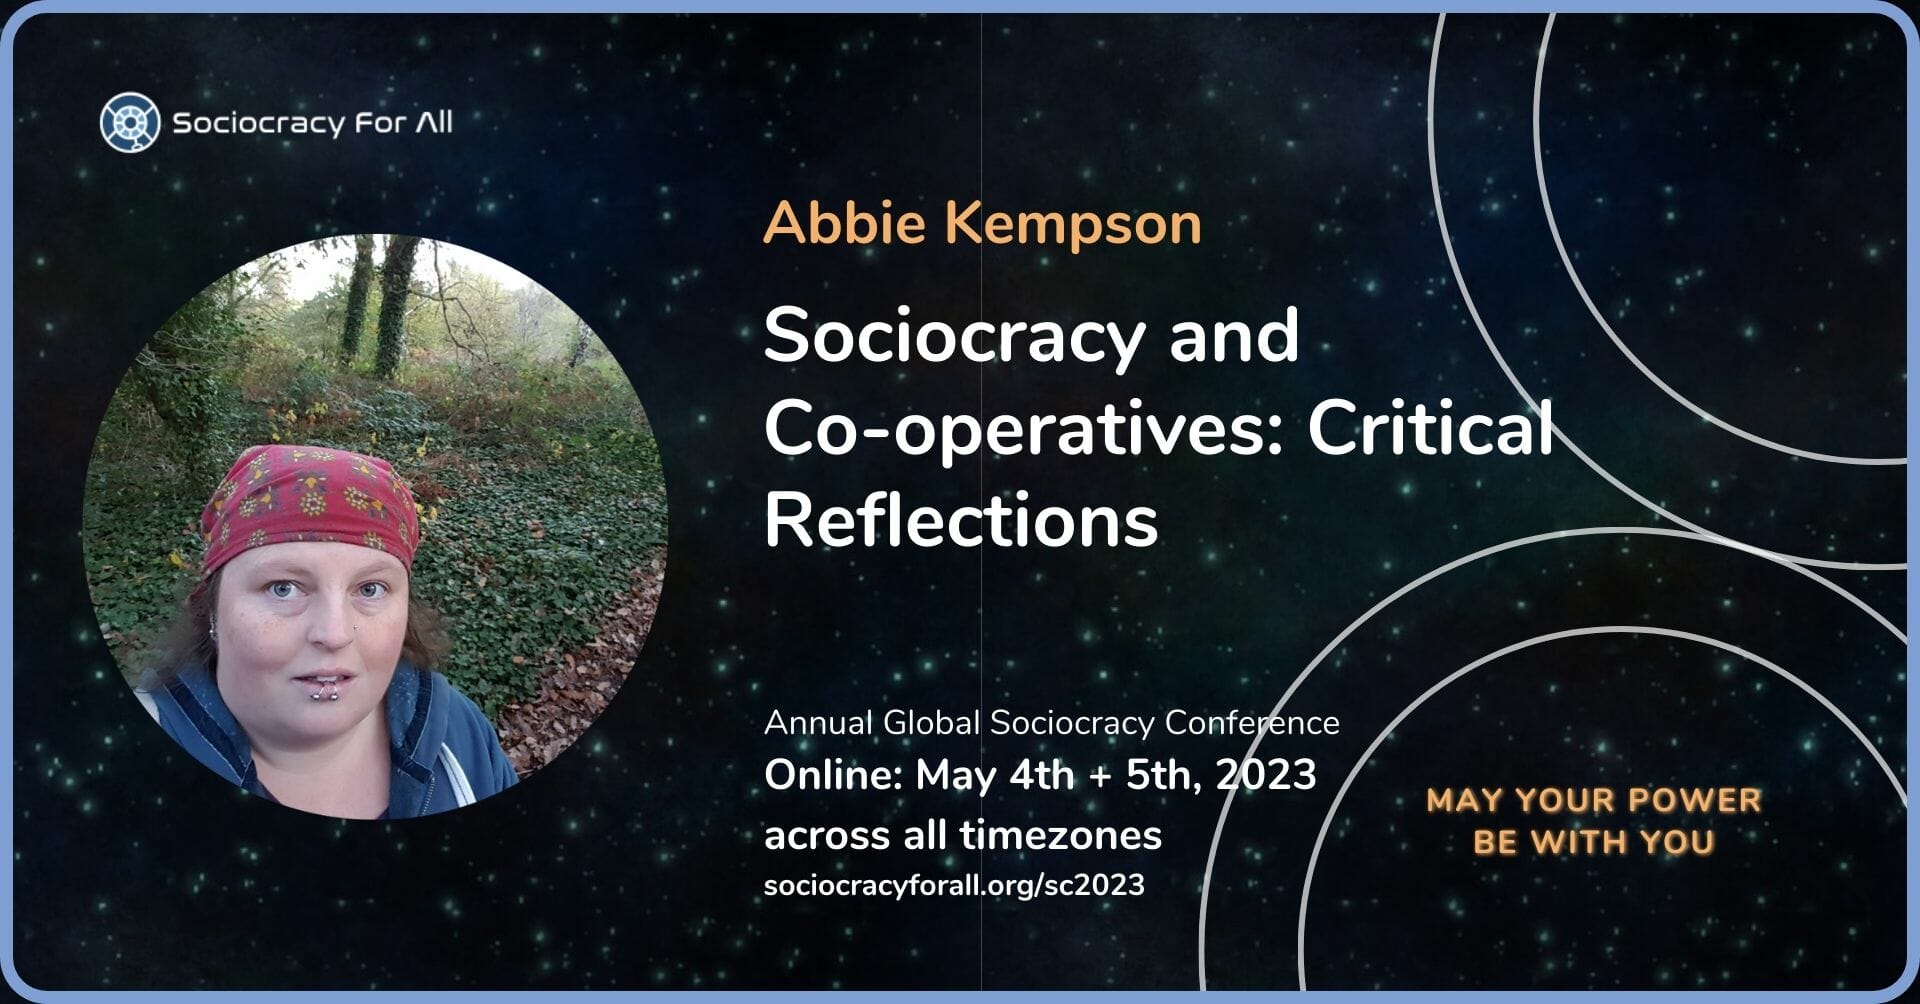 Sociocracy and Co-operatives Critical Reflections